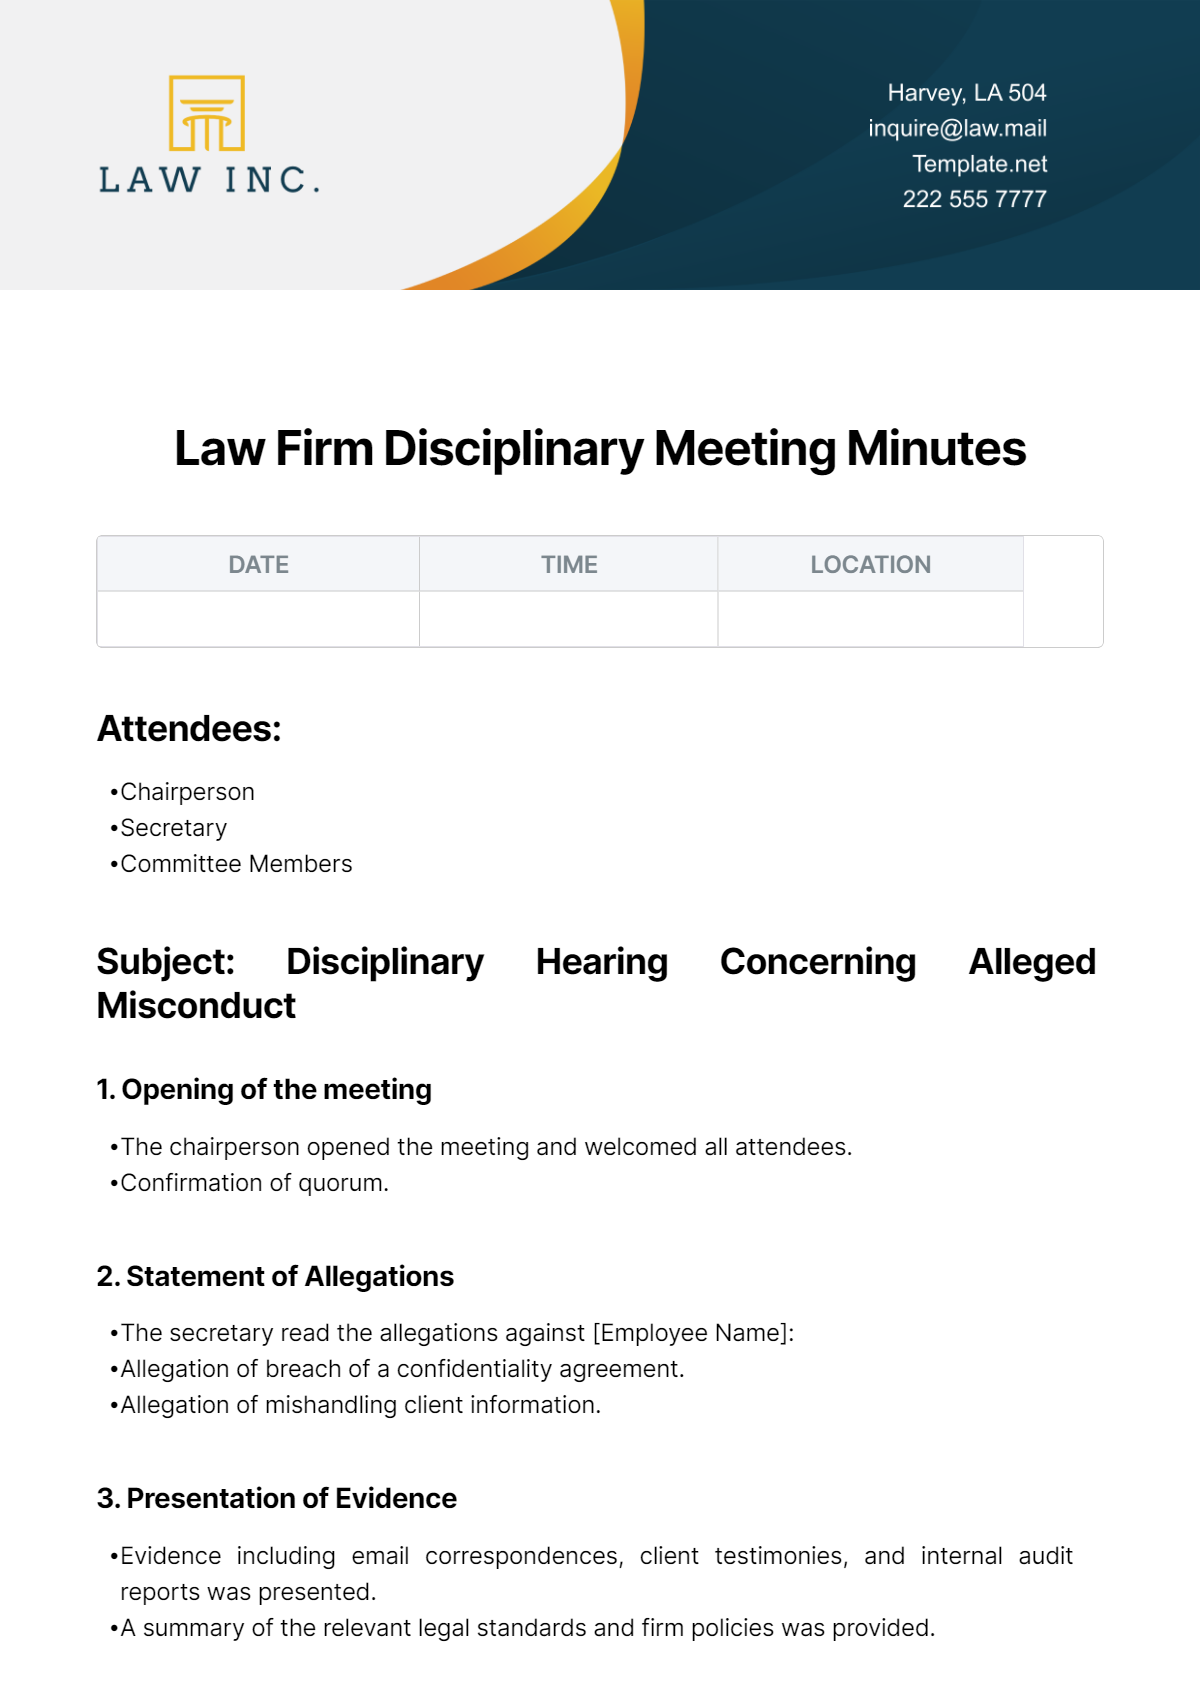 Law Firm Disciplinary Meeting Minutes Template